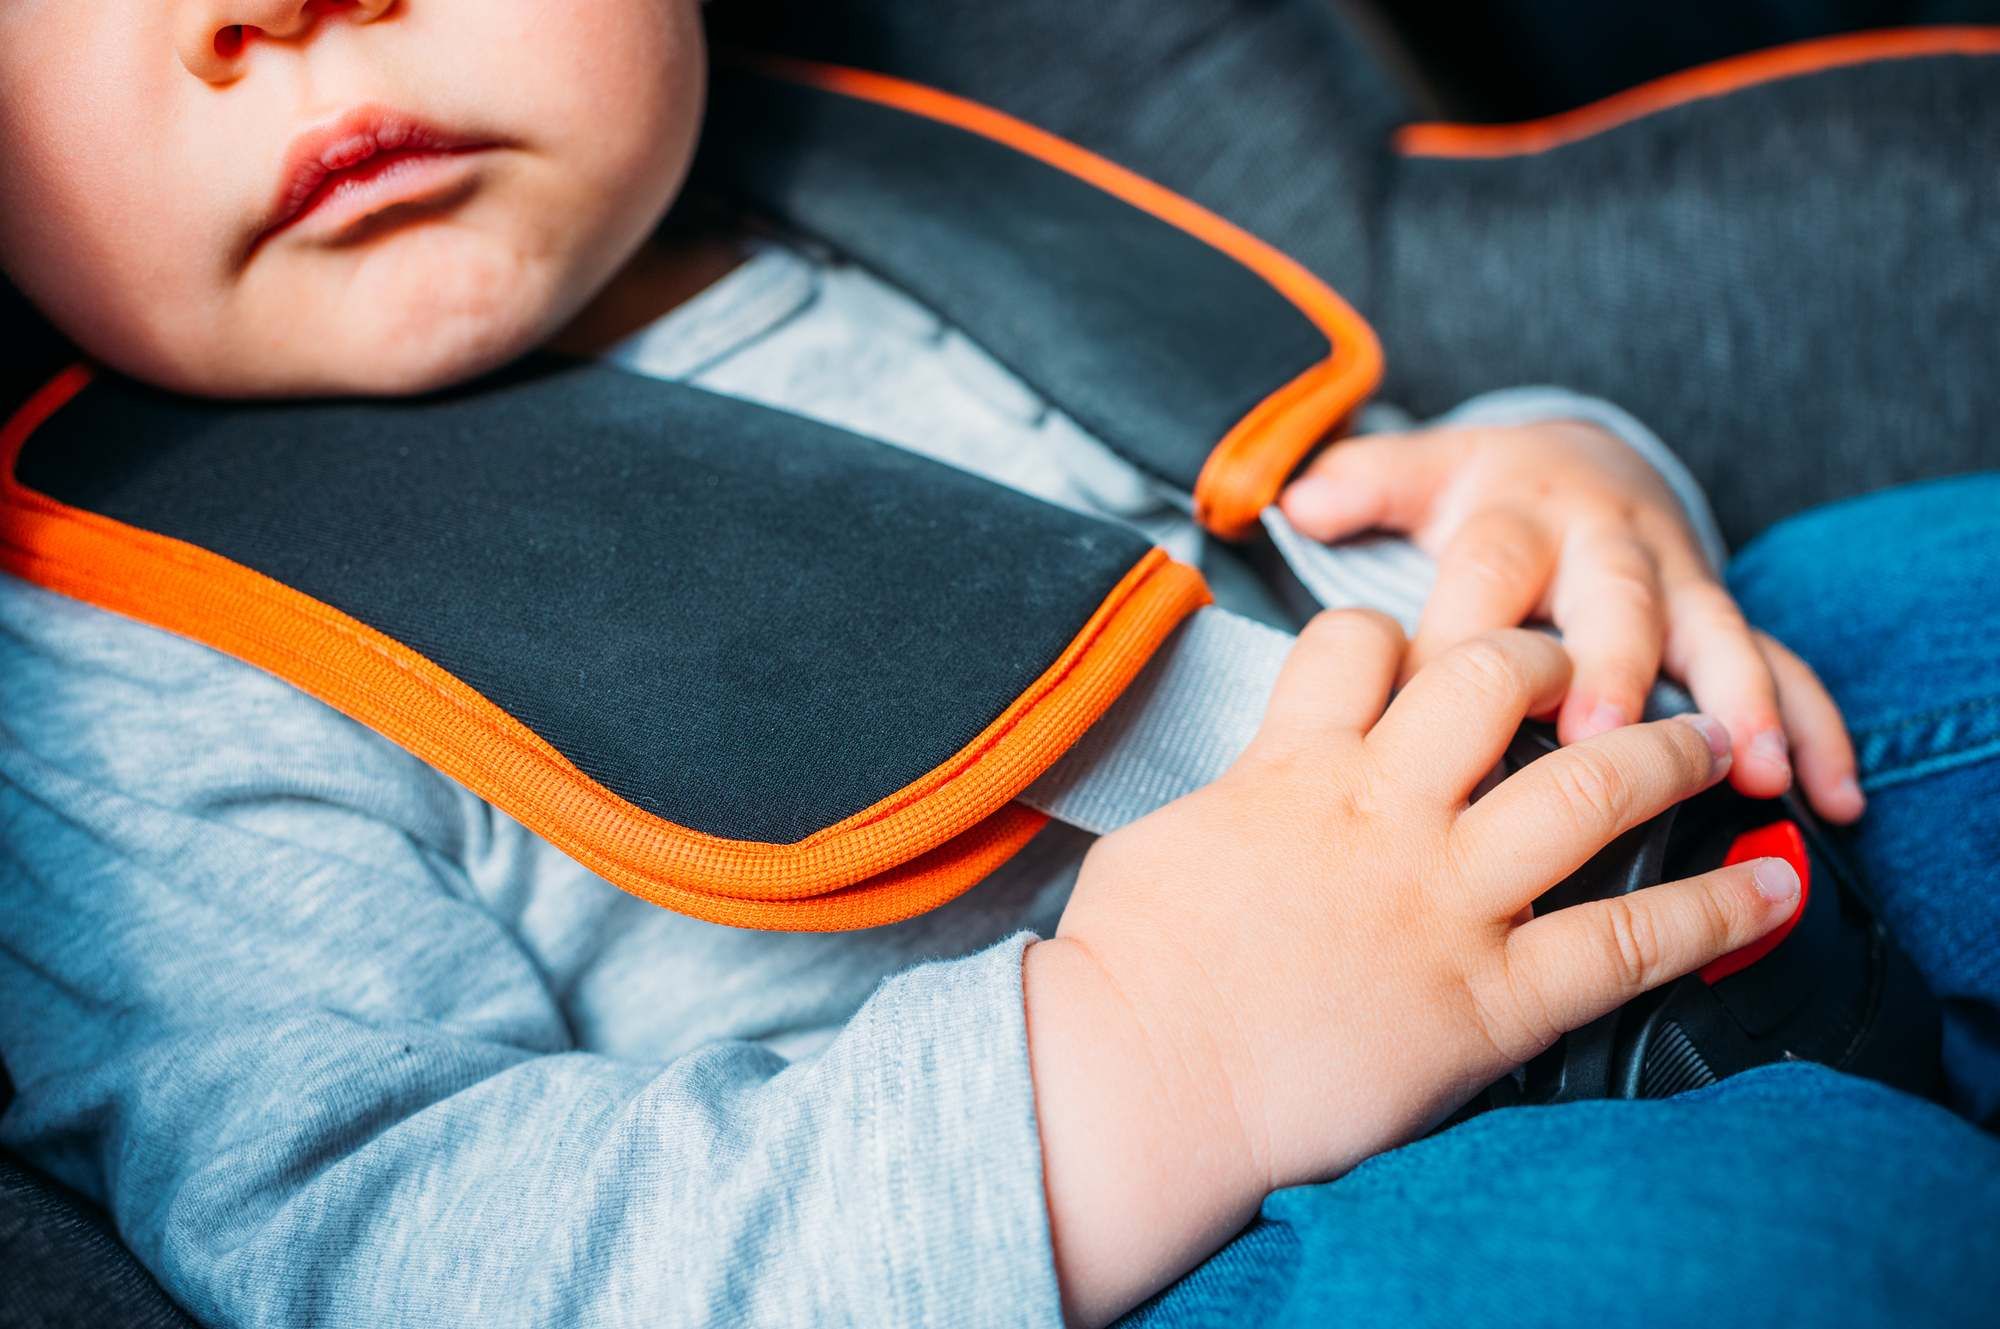 Britax is facing a class action lawsuit accusing it of false marketing.